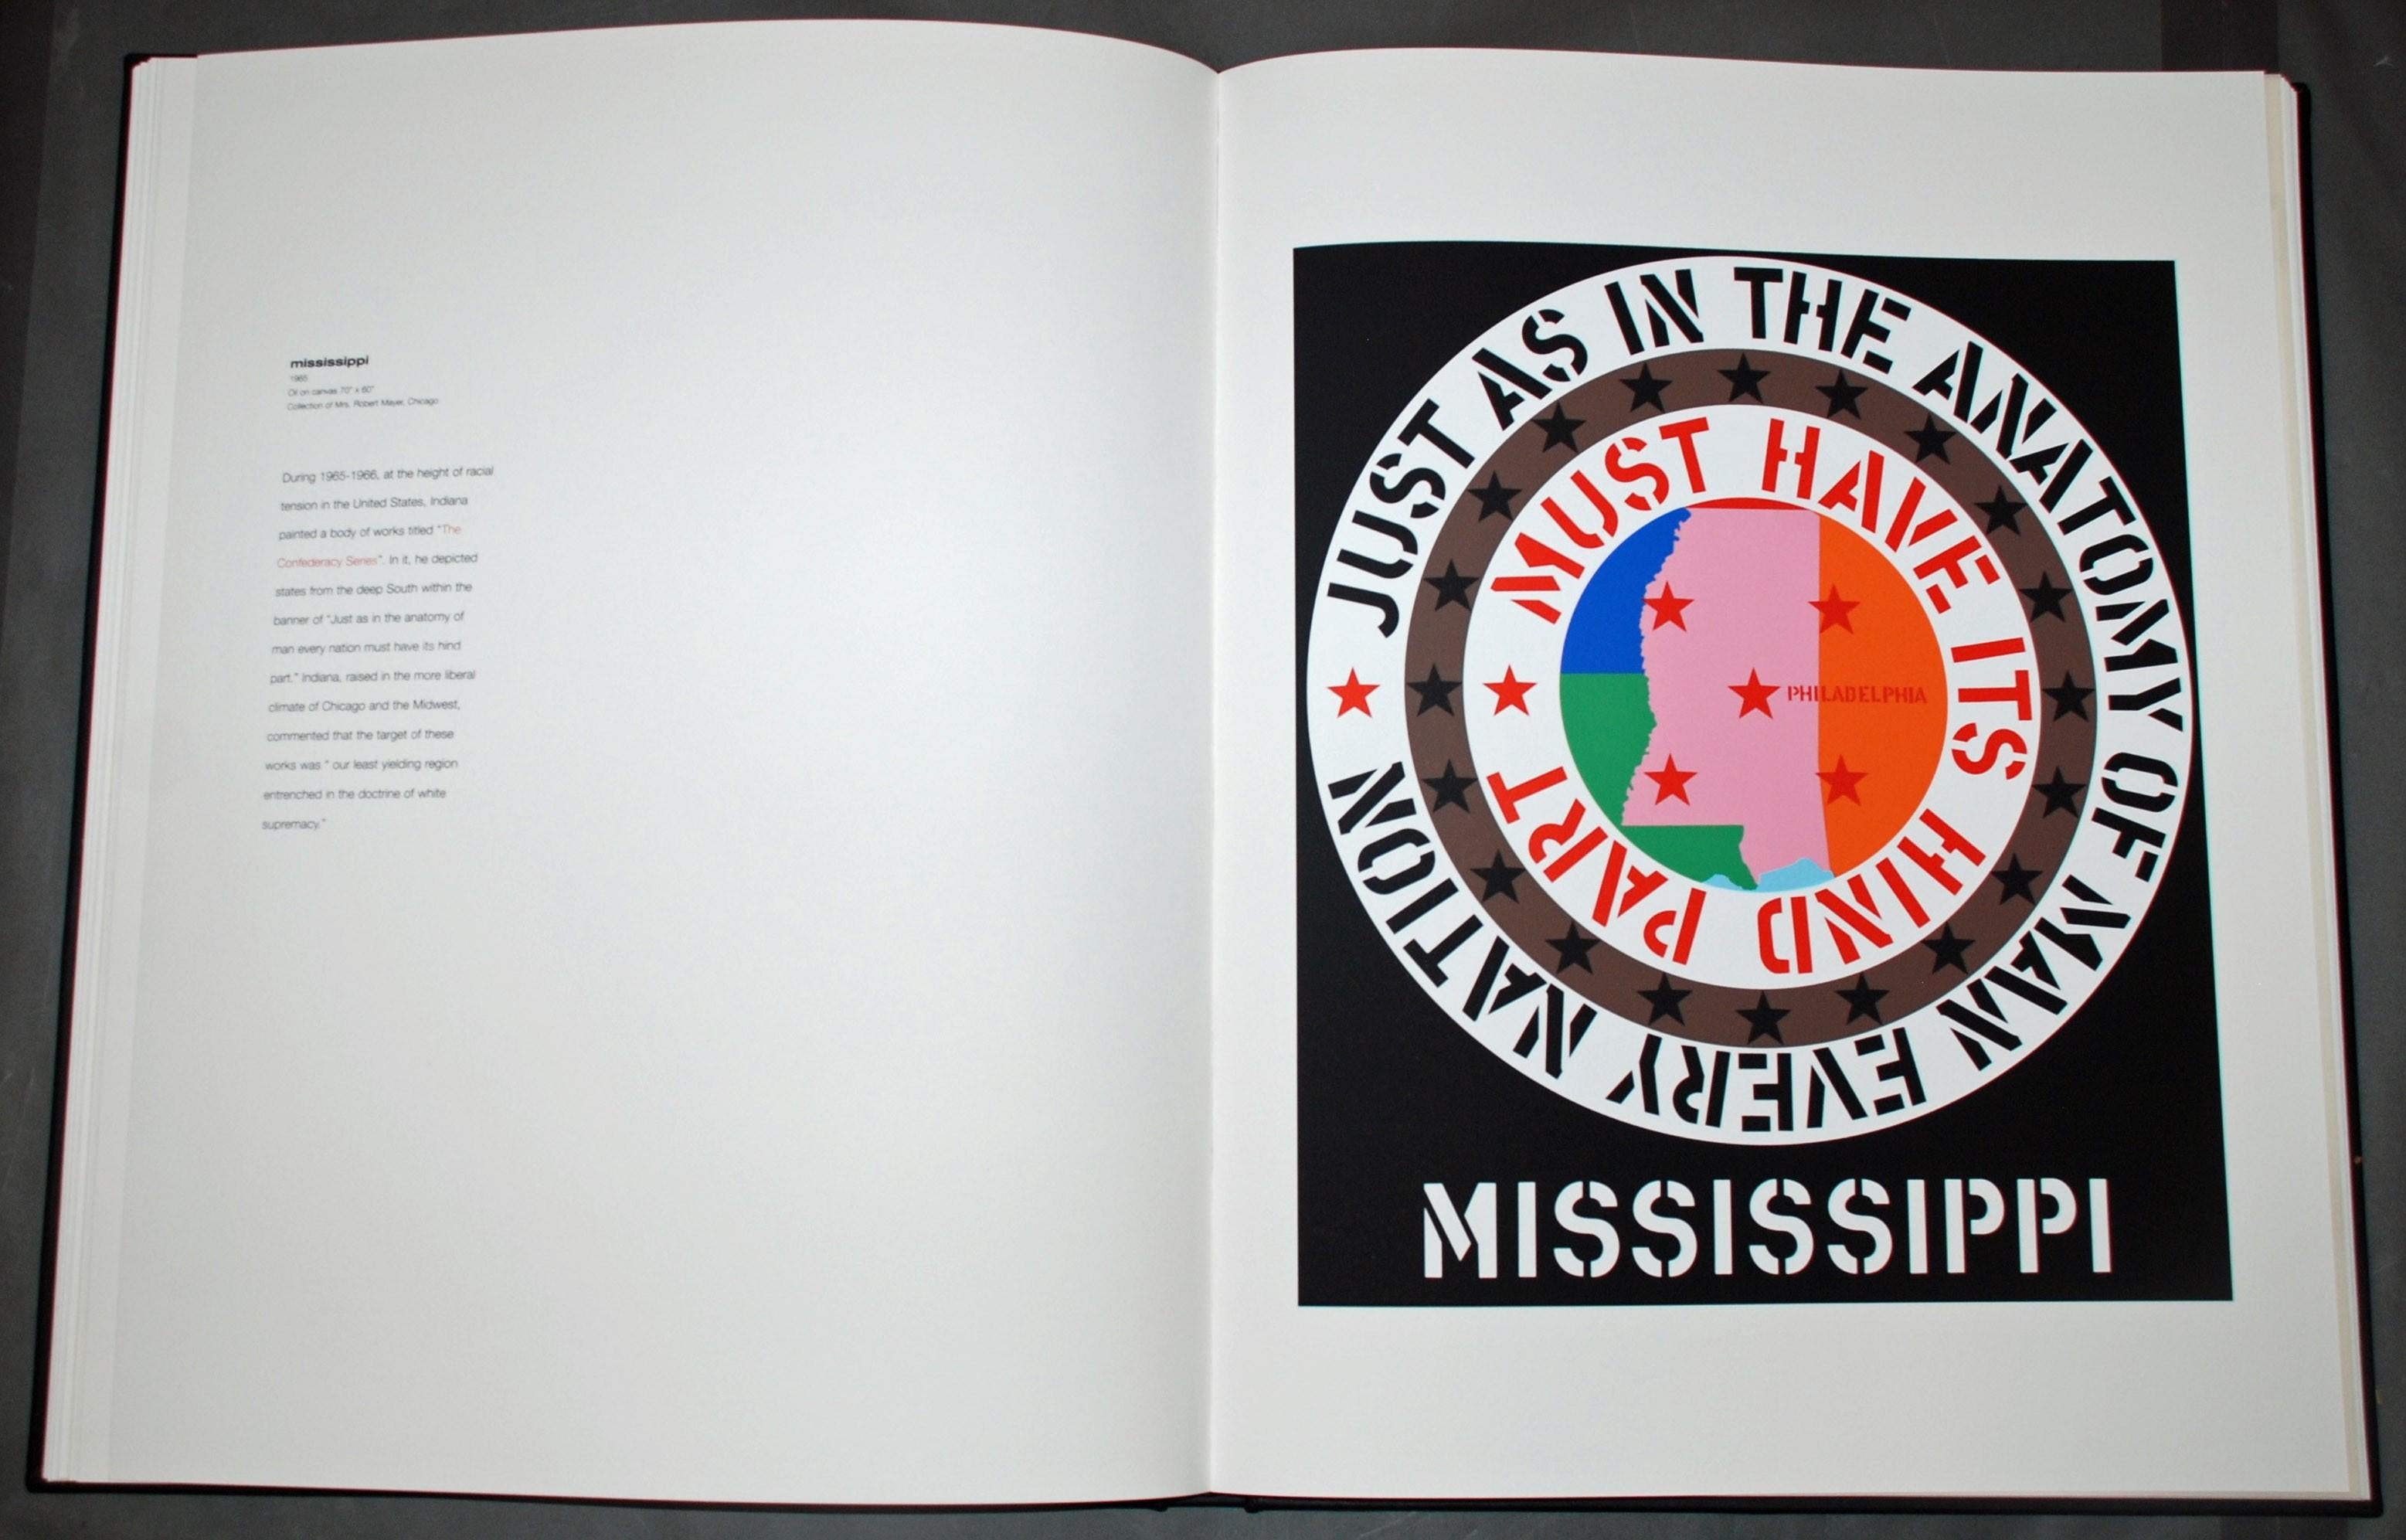 Mississippi, from The American Dream - Abstract Print by Robert Indiana